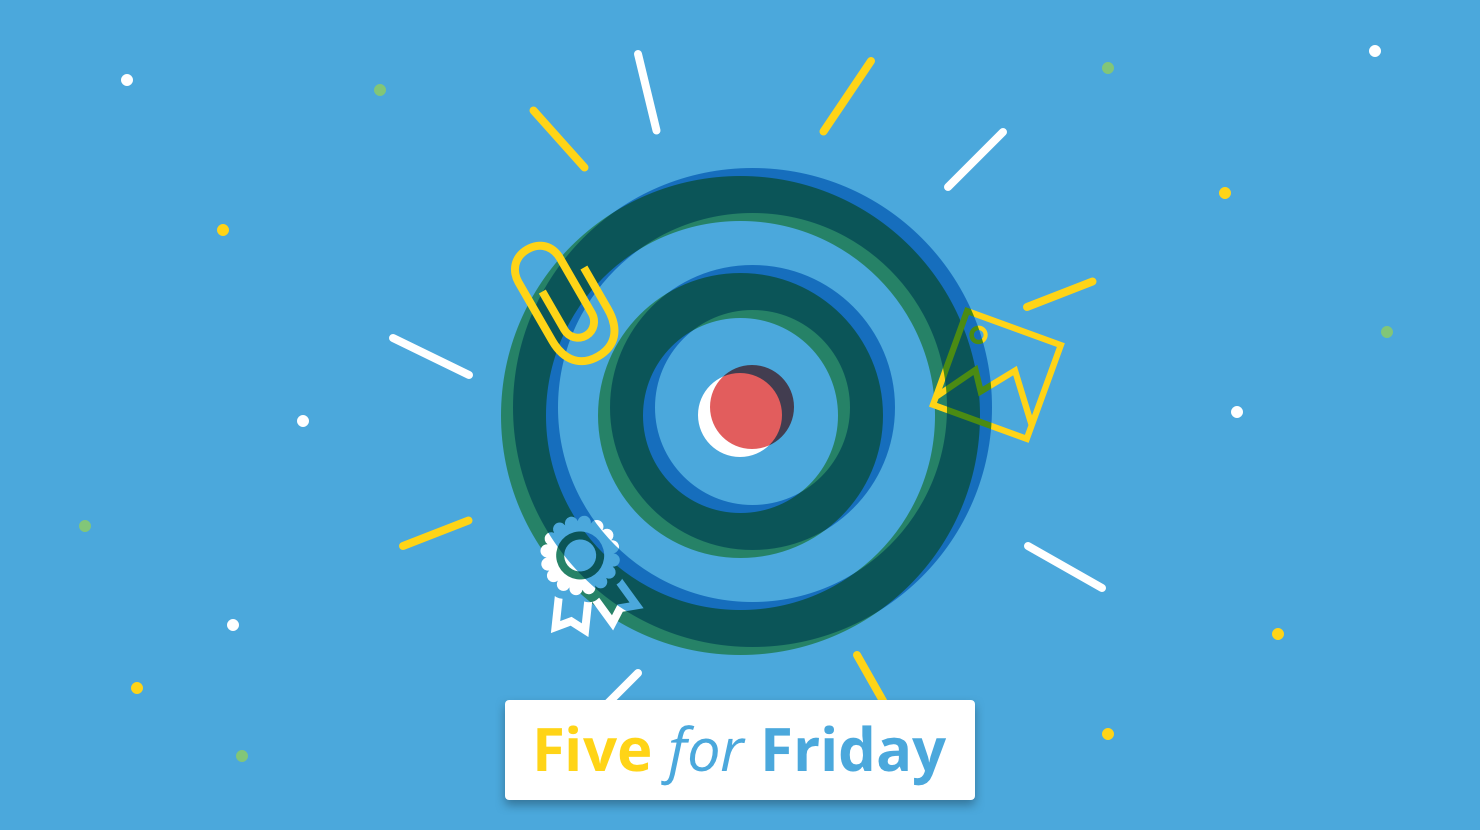 Five for Friday: Career resolutions and goals